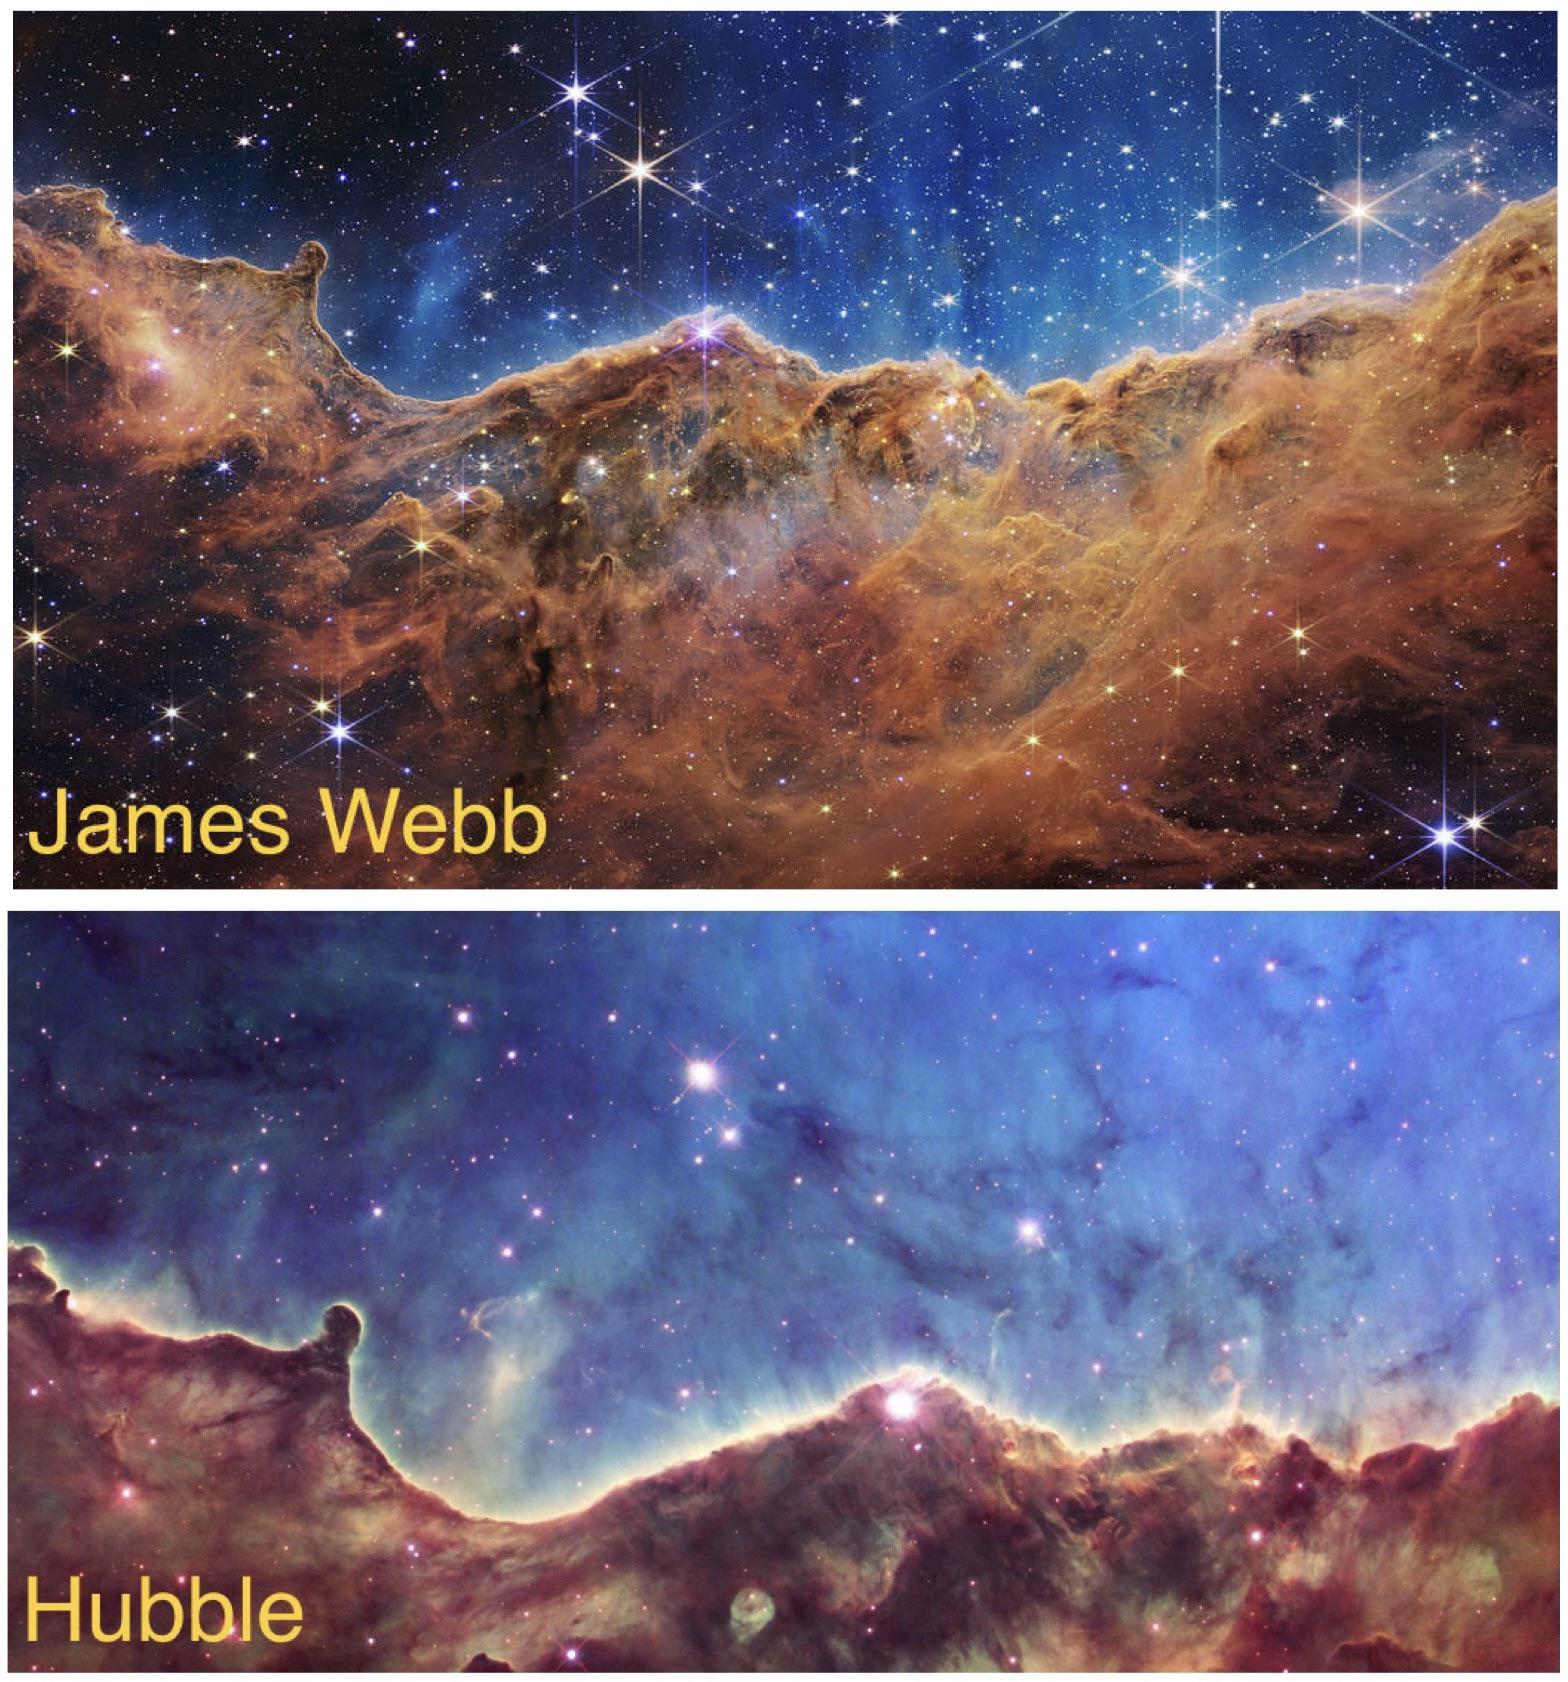 fascinating photos - James Webb compared to Hubble